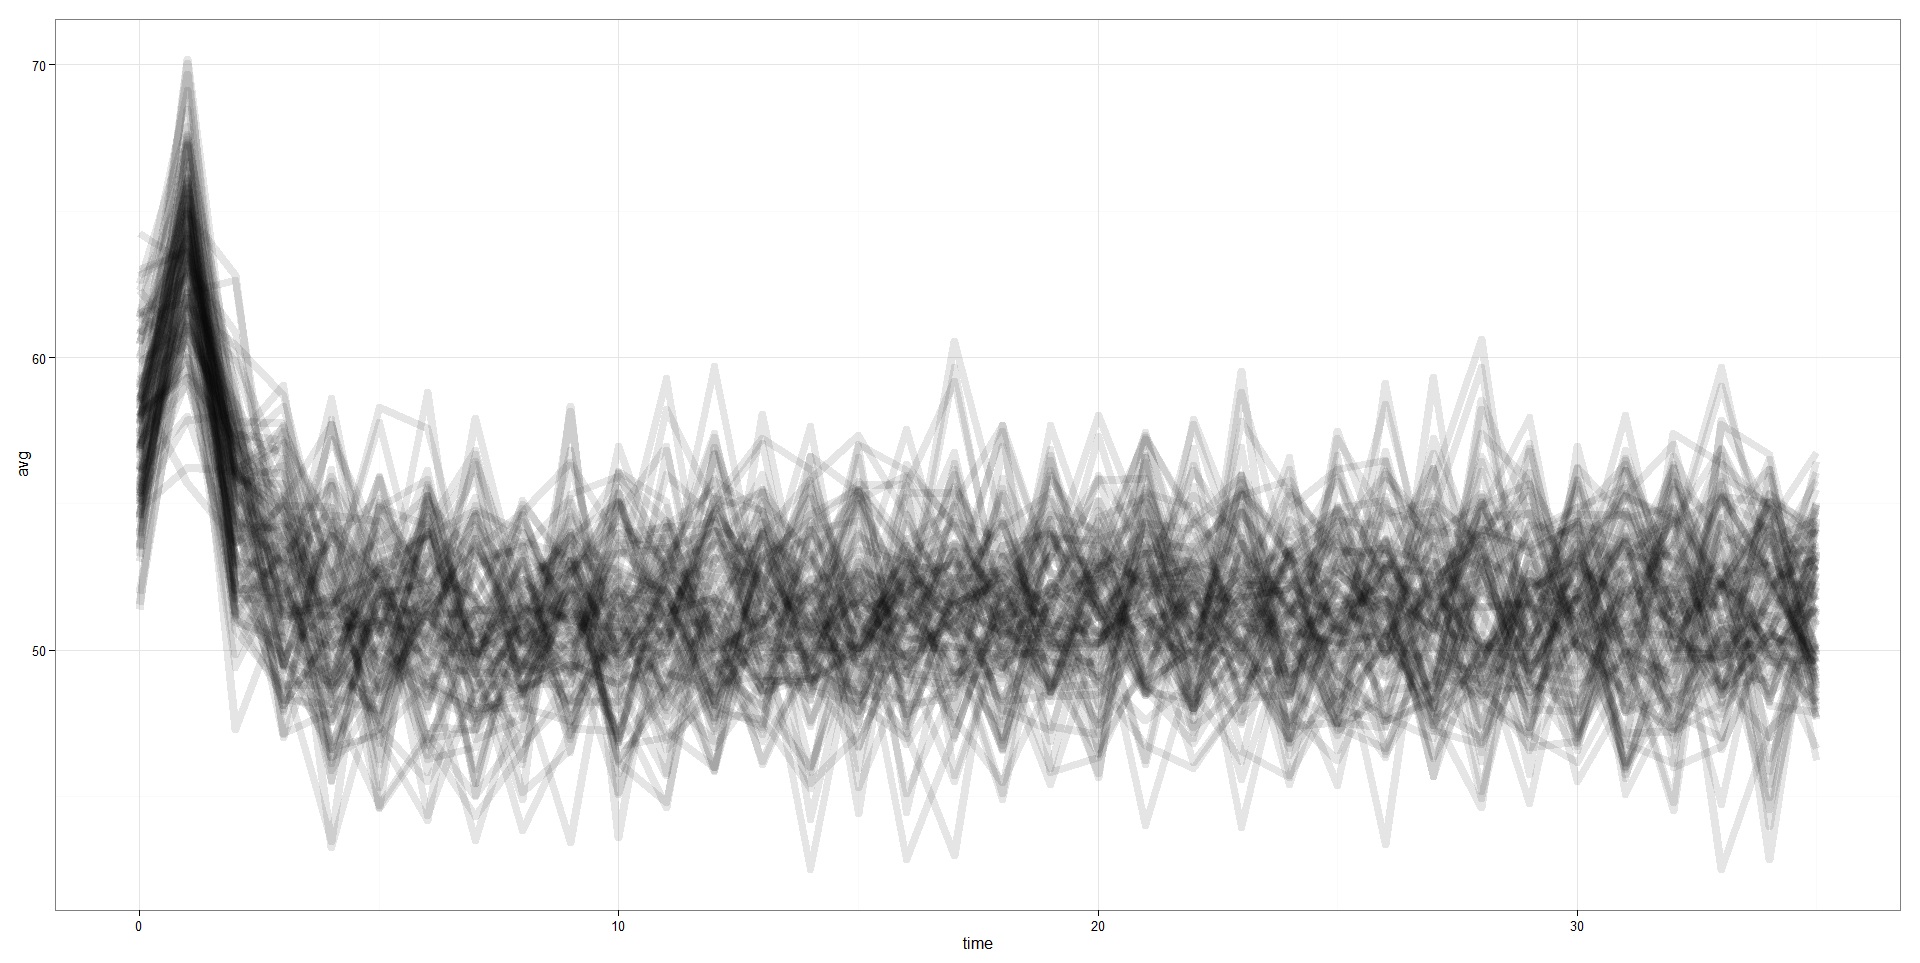 100 runs of Average Results over time, overlaid with each other